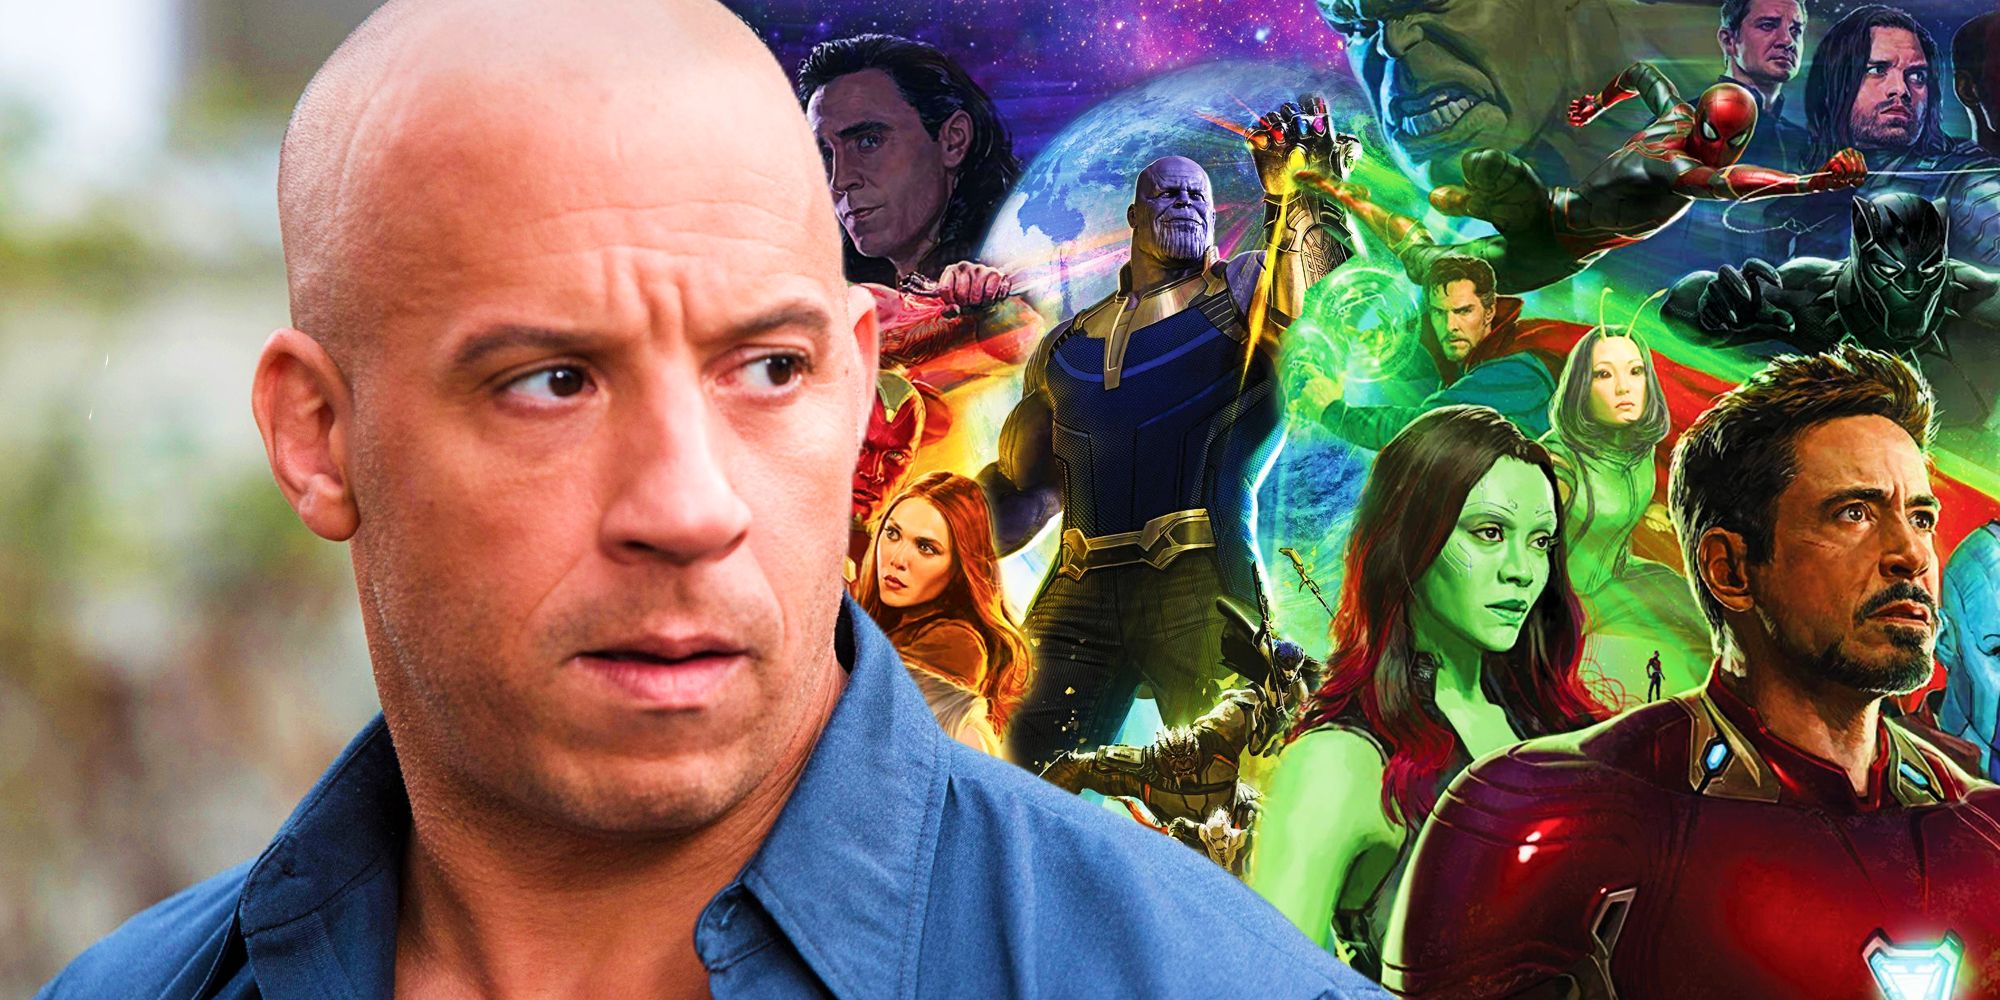 Vin Diesel as Dominic Toretto and the Marvel Universe